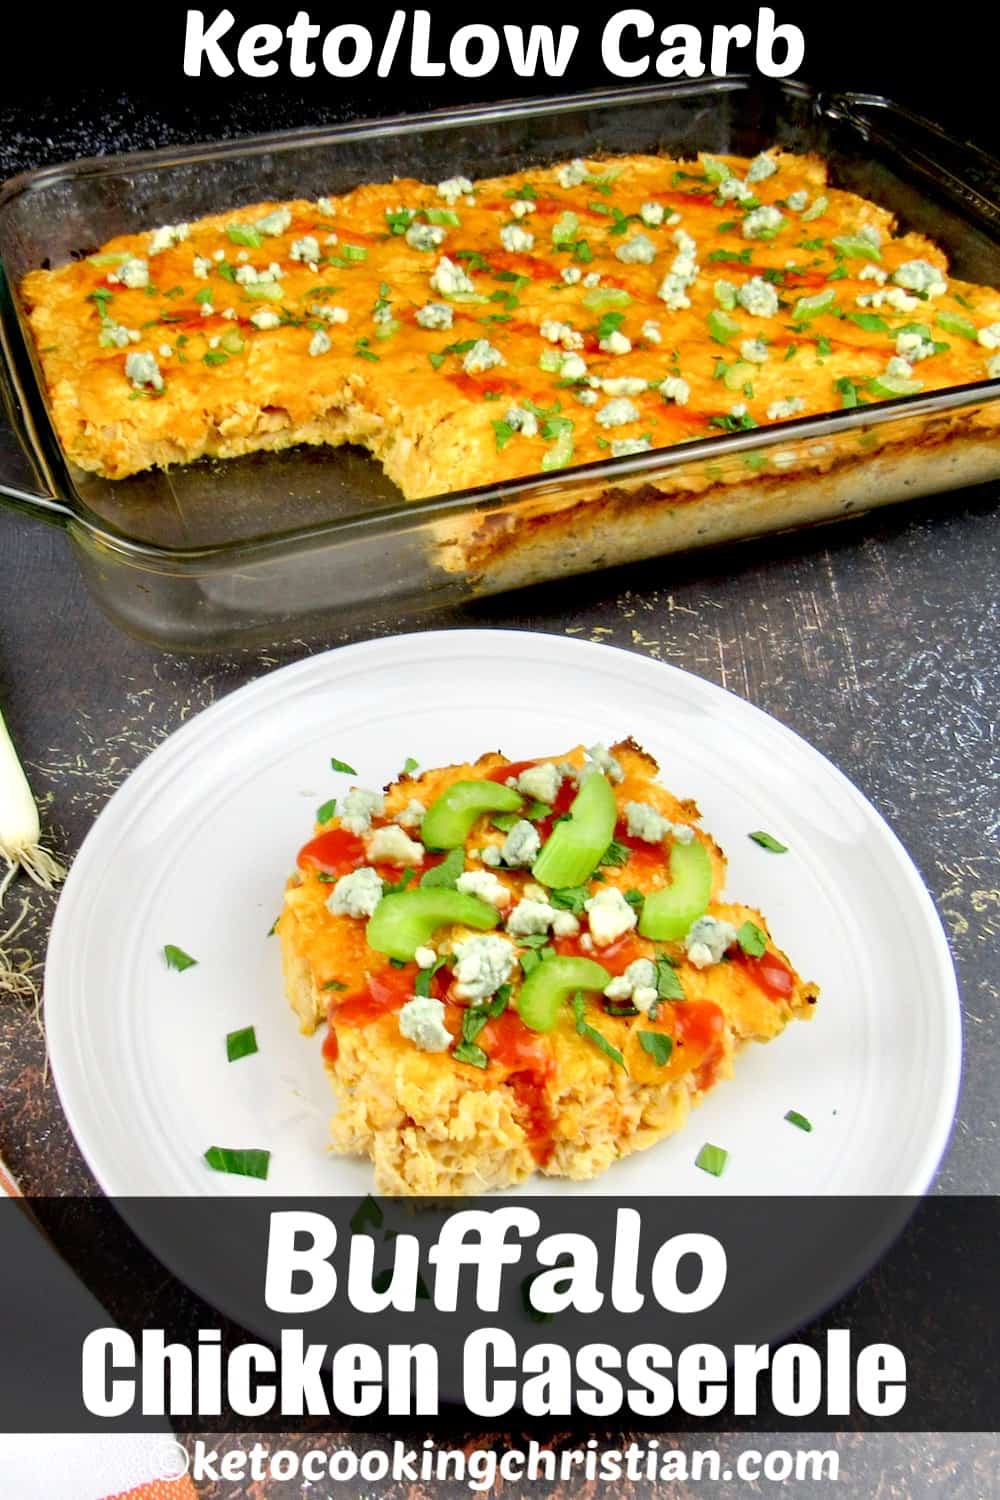 slice of buffalo chicken casserole and casserole with slice missing